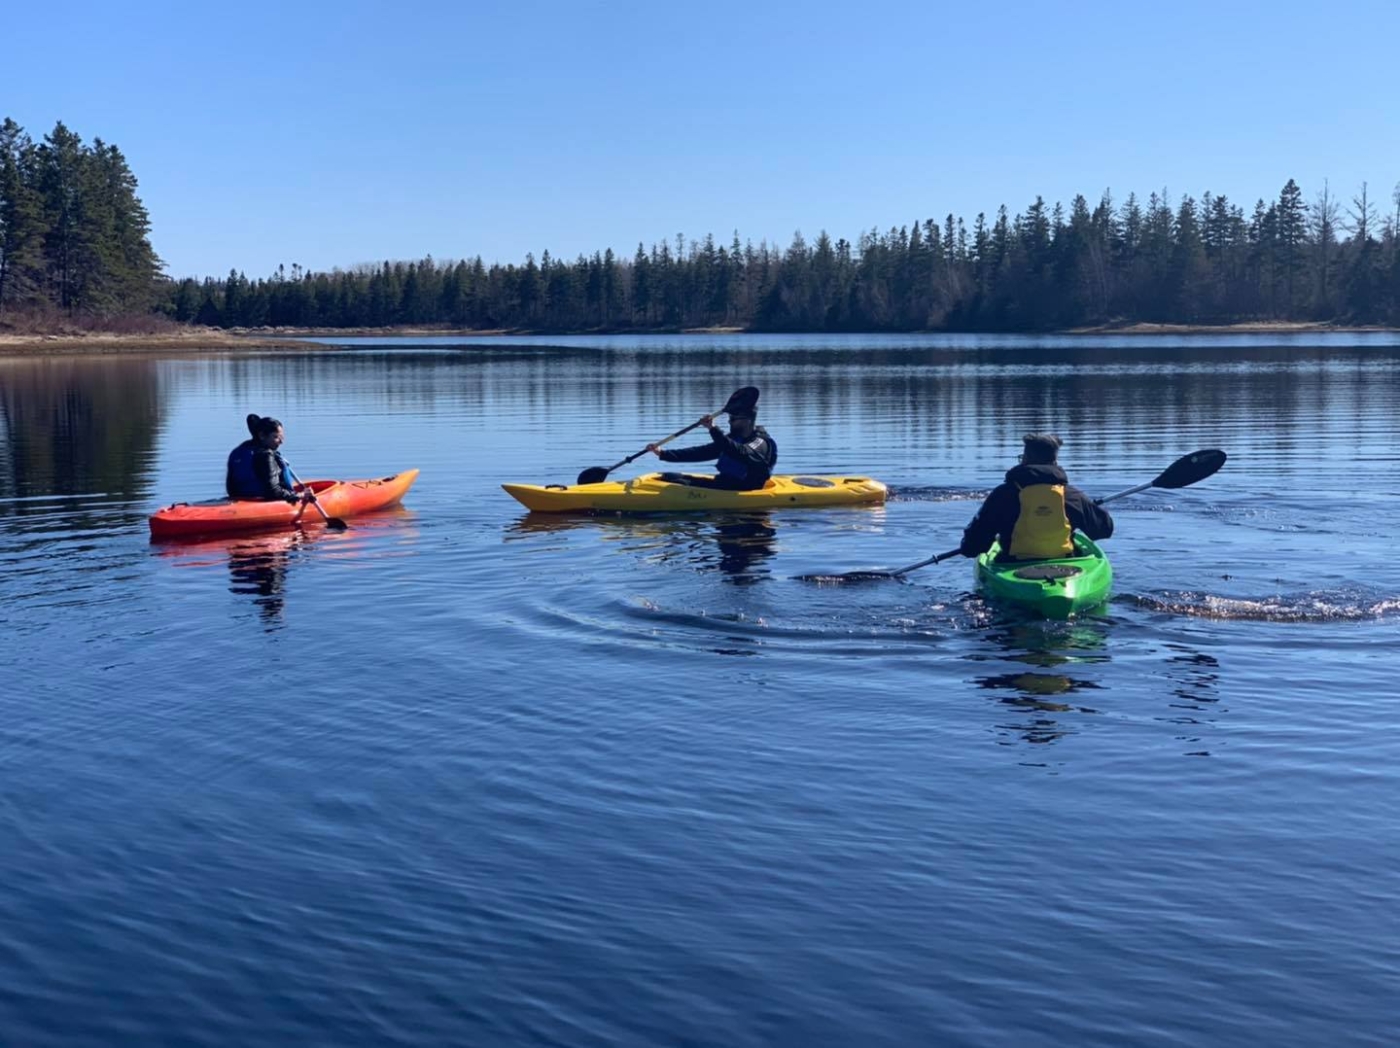 Three kayakers paddling in the water